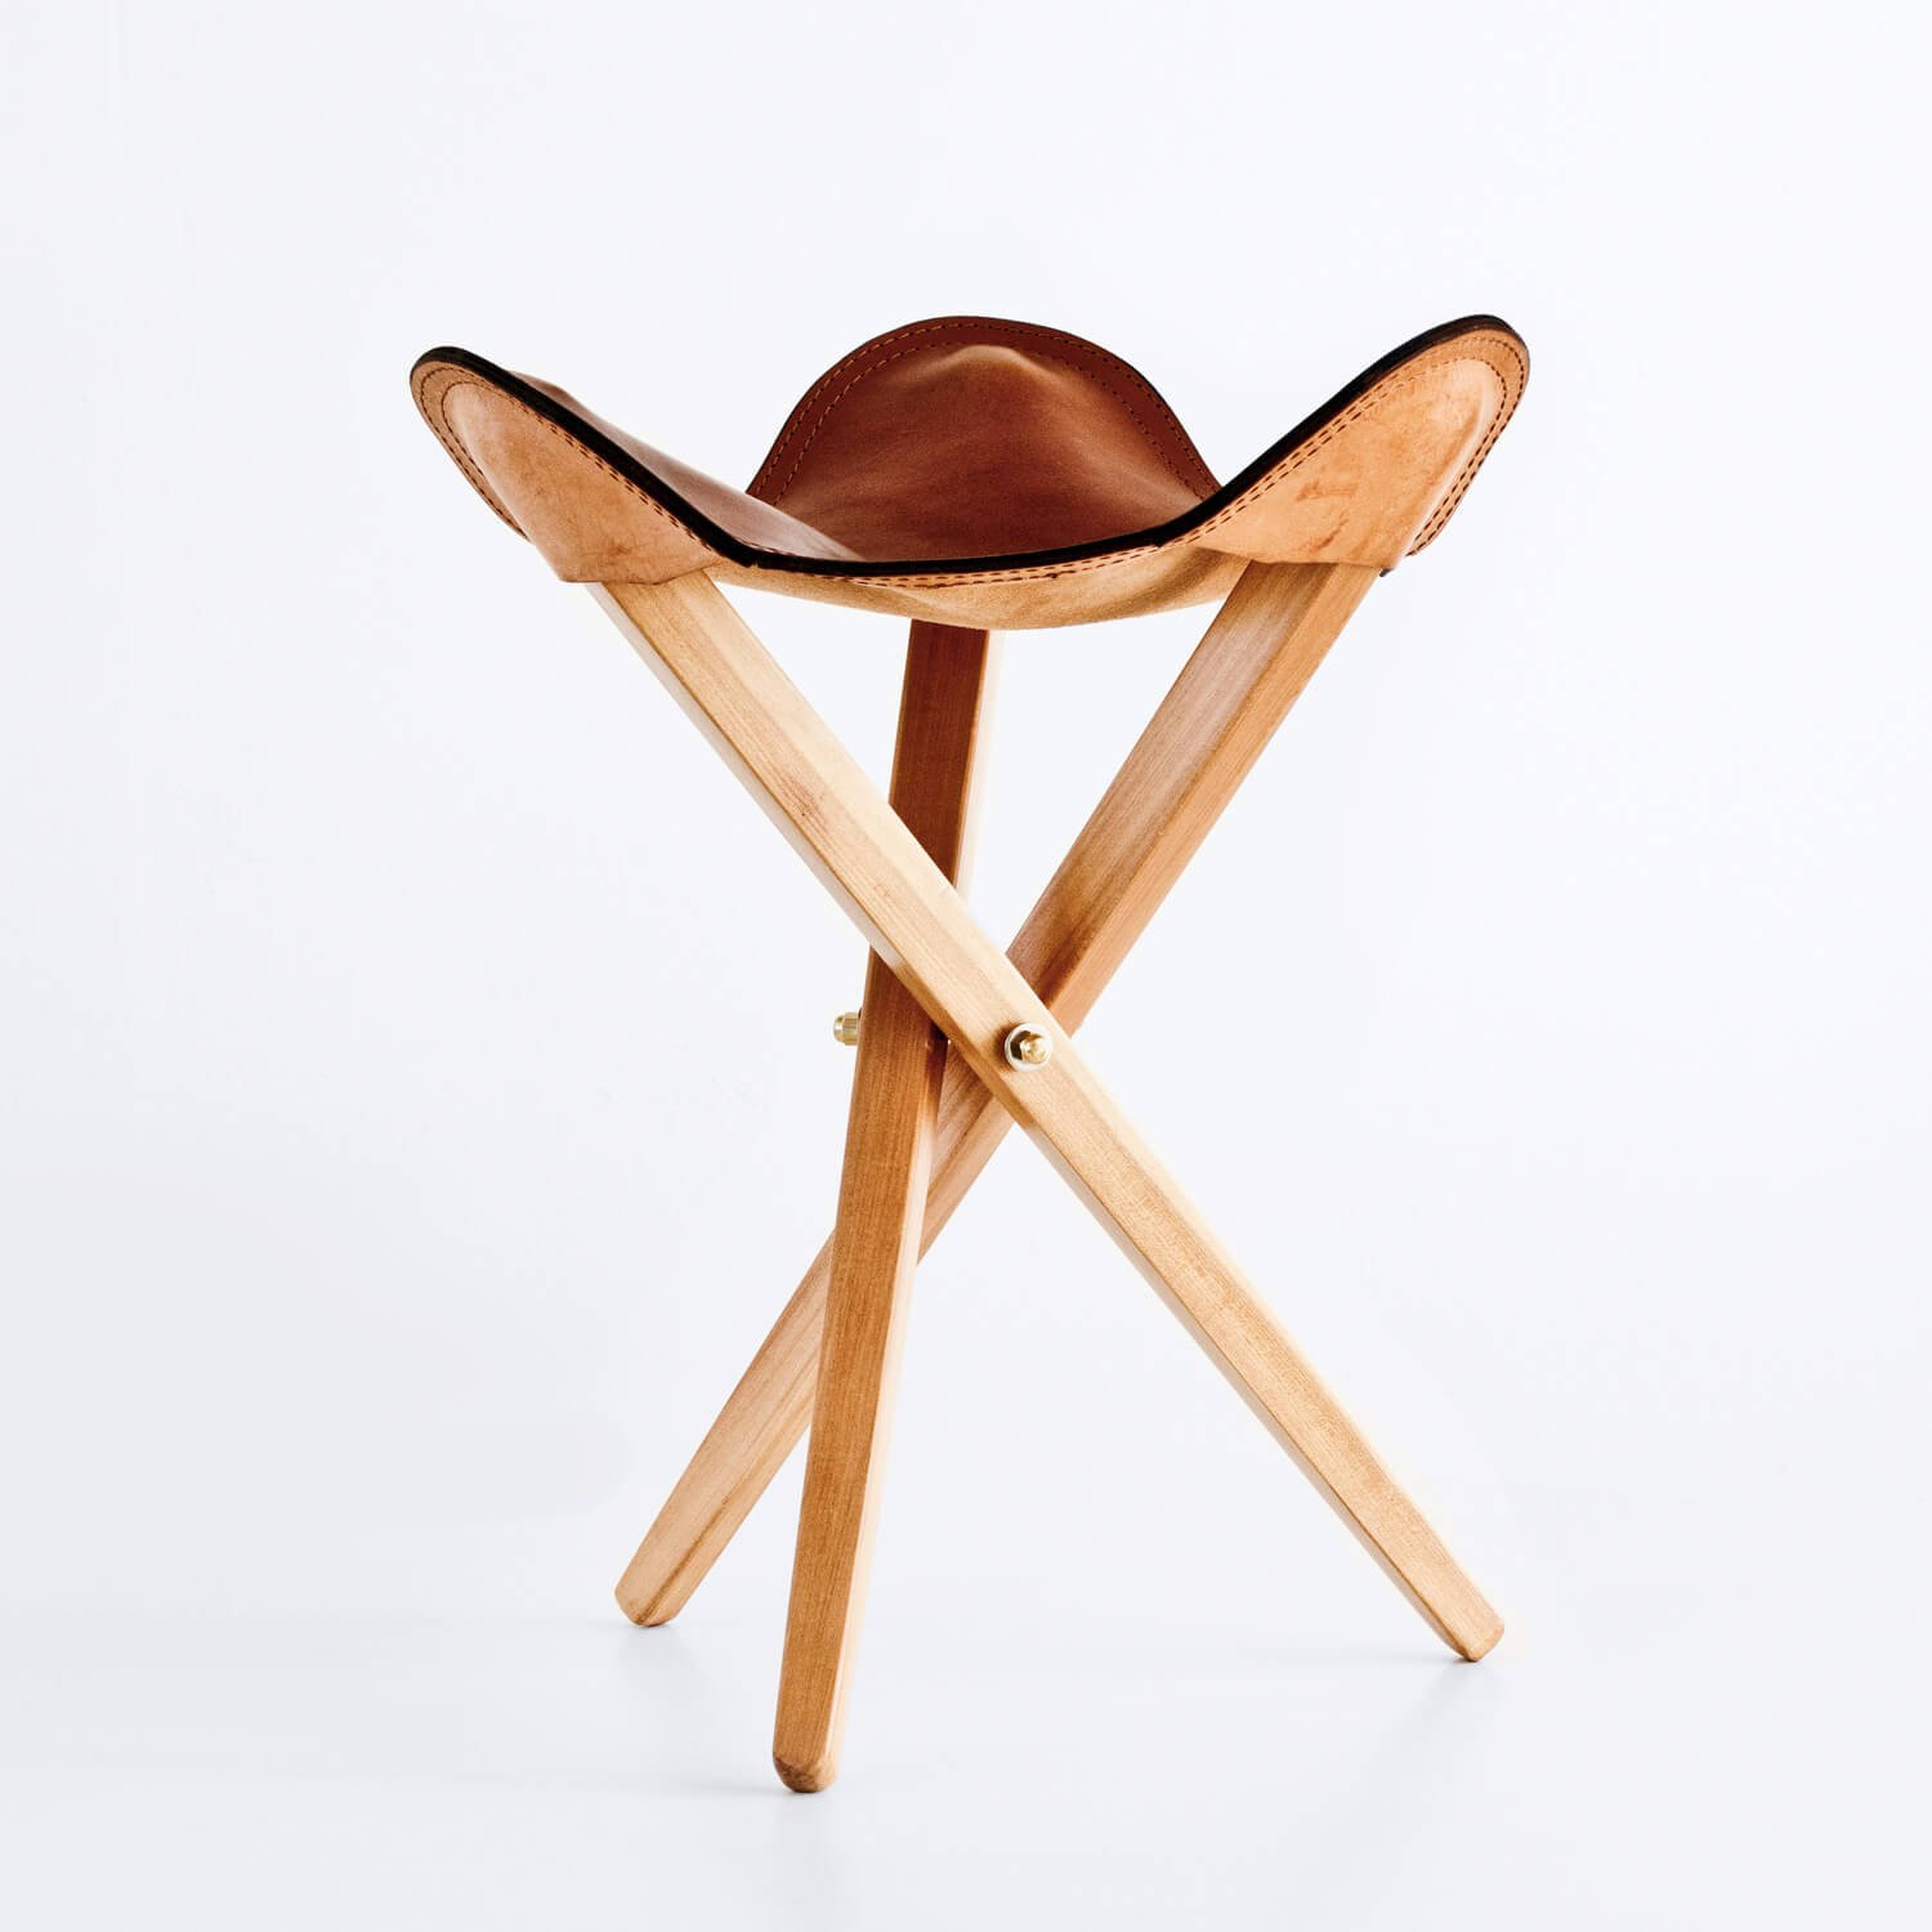 Palermo Tripolina Camp Stool By The Citizenry - The Citizenry